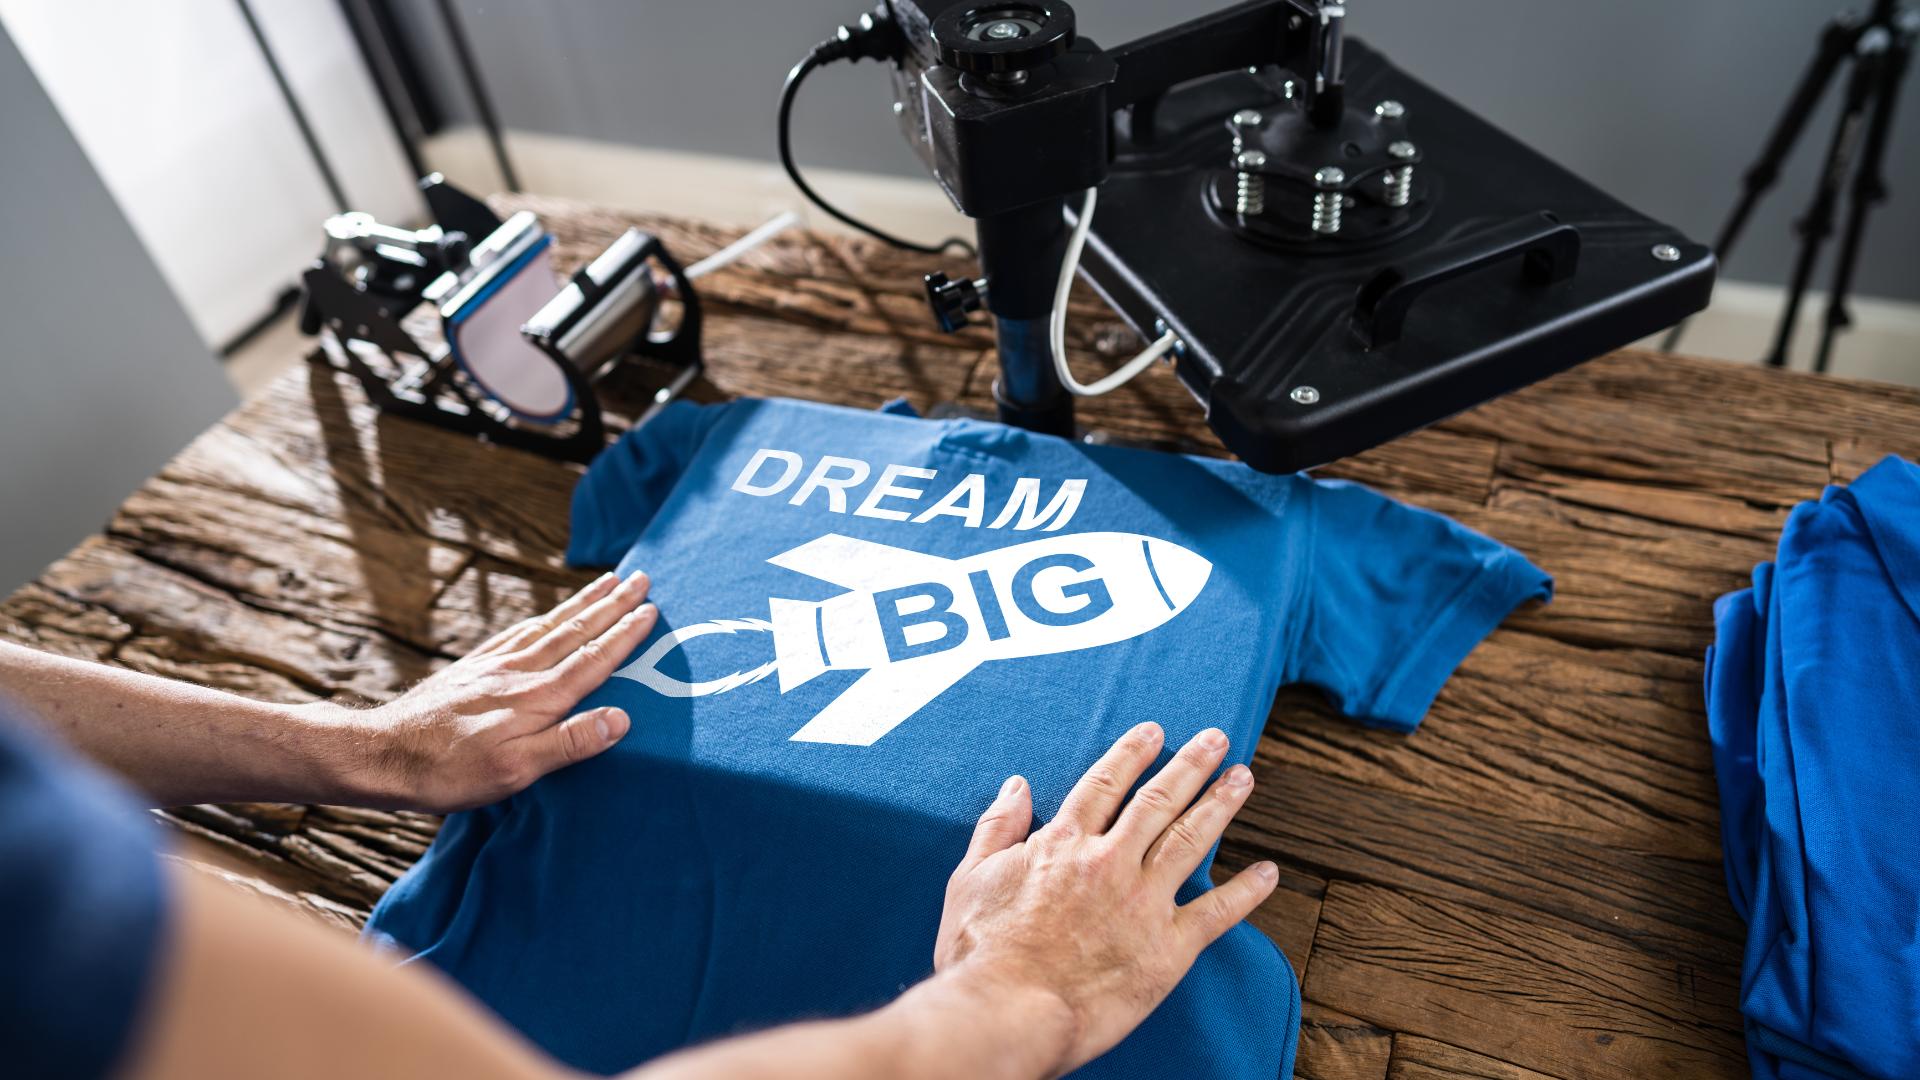 Start a T-Shirt Business with a Heat Press - 10 Reasons Why